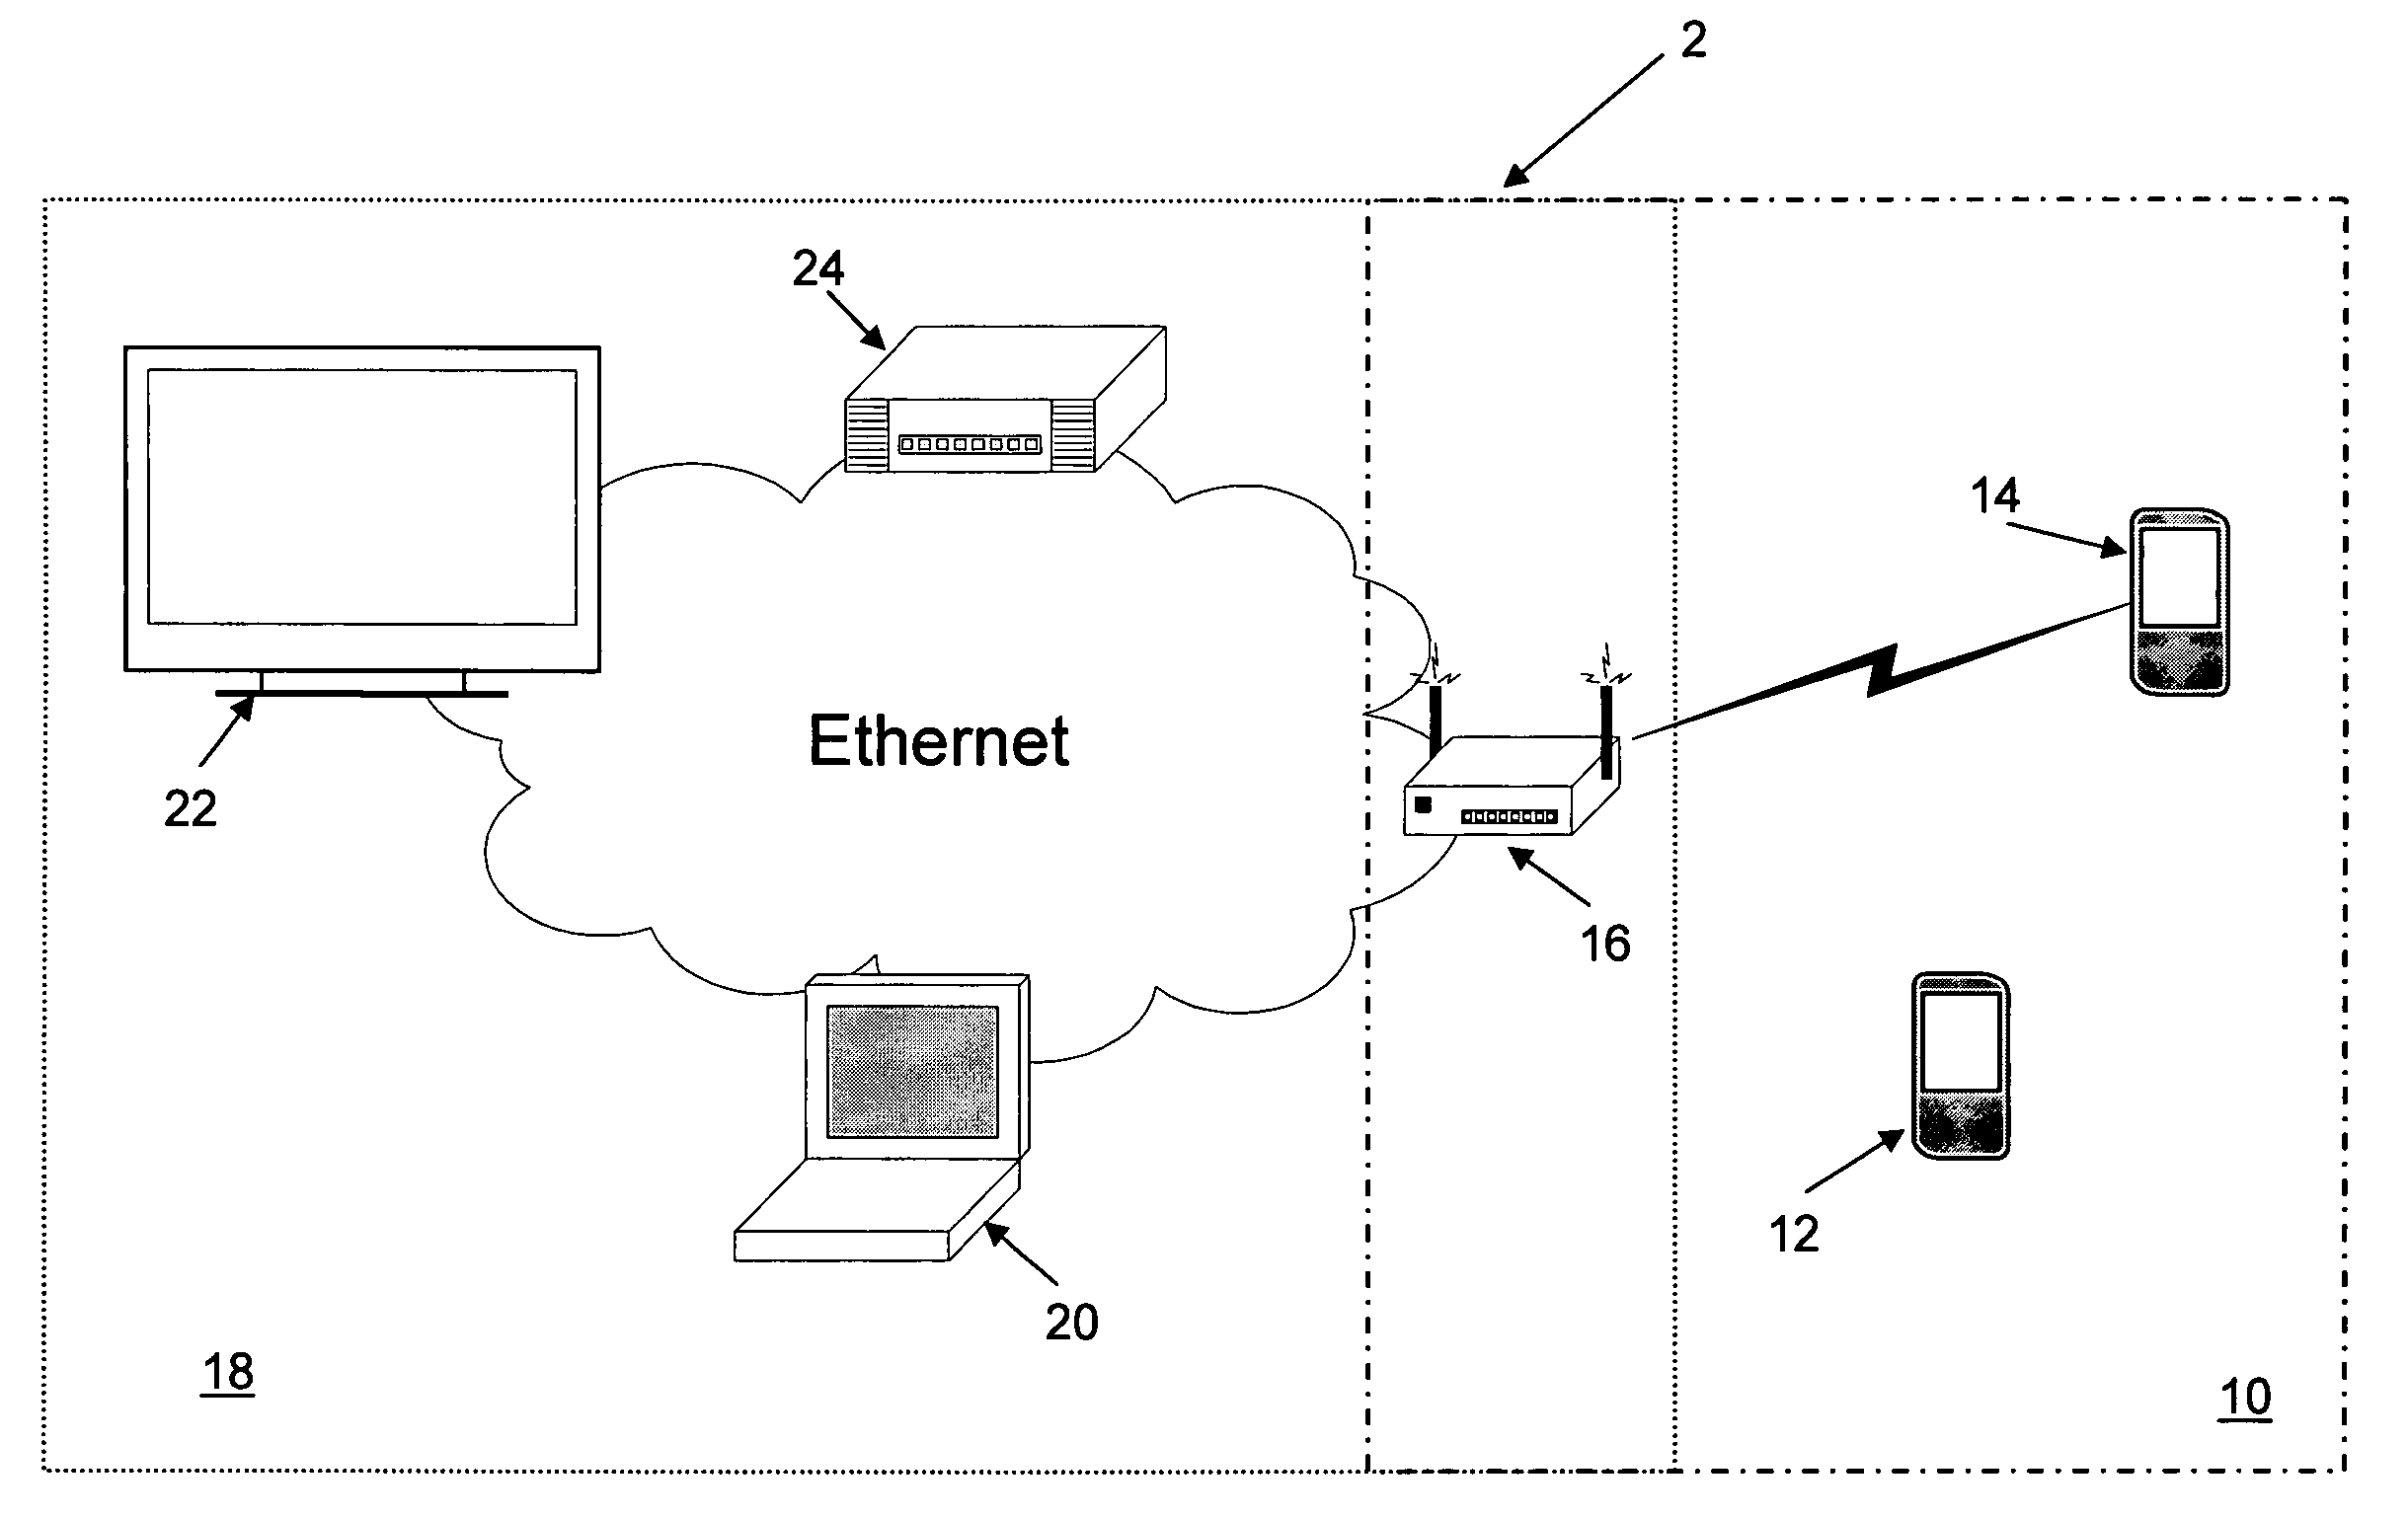 Method for establishing a security association between a wireless access point and a wireless node in a UPnP environment